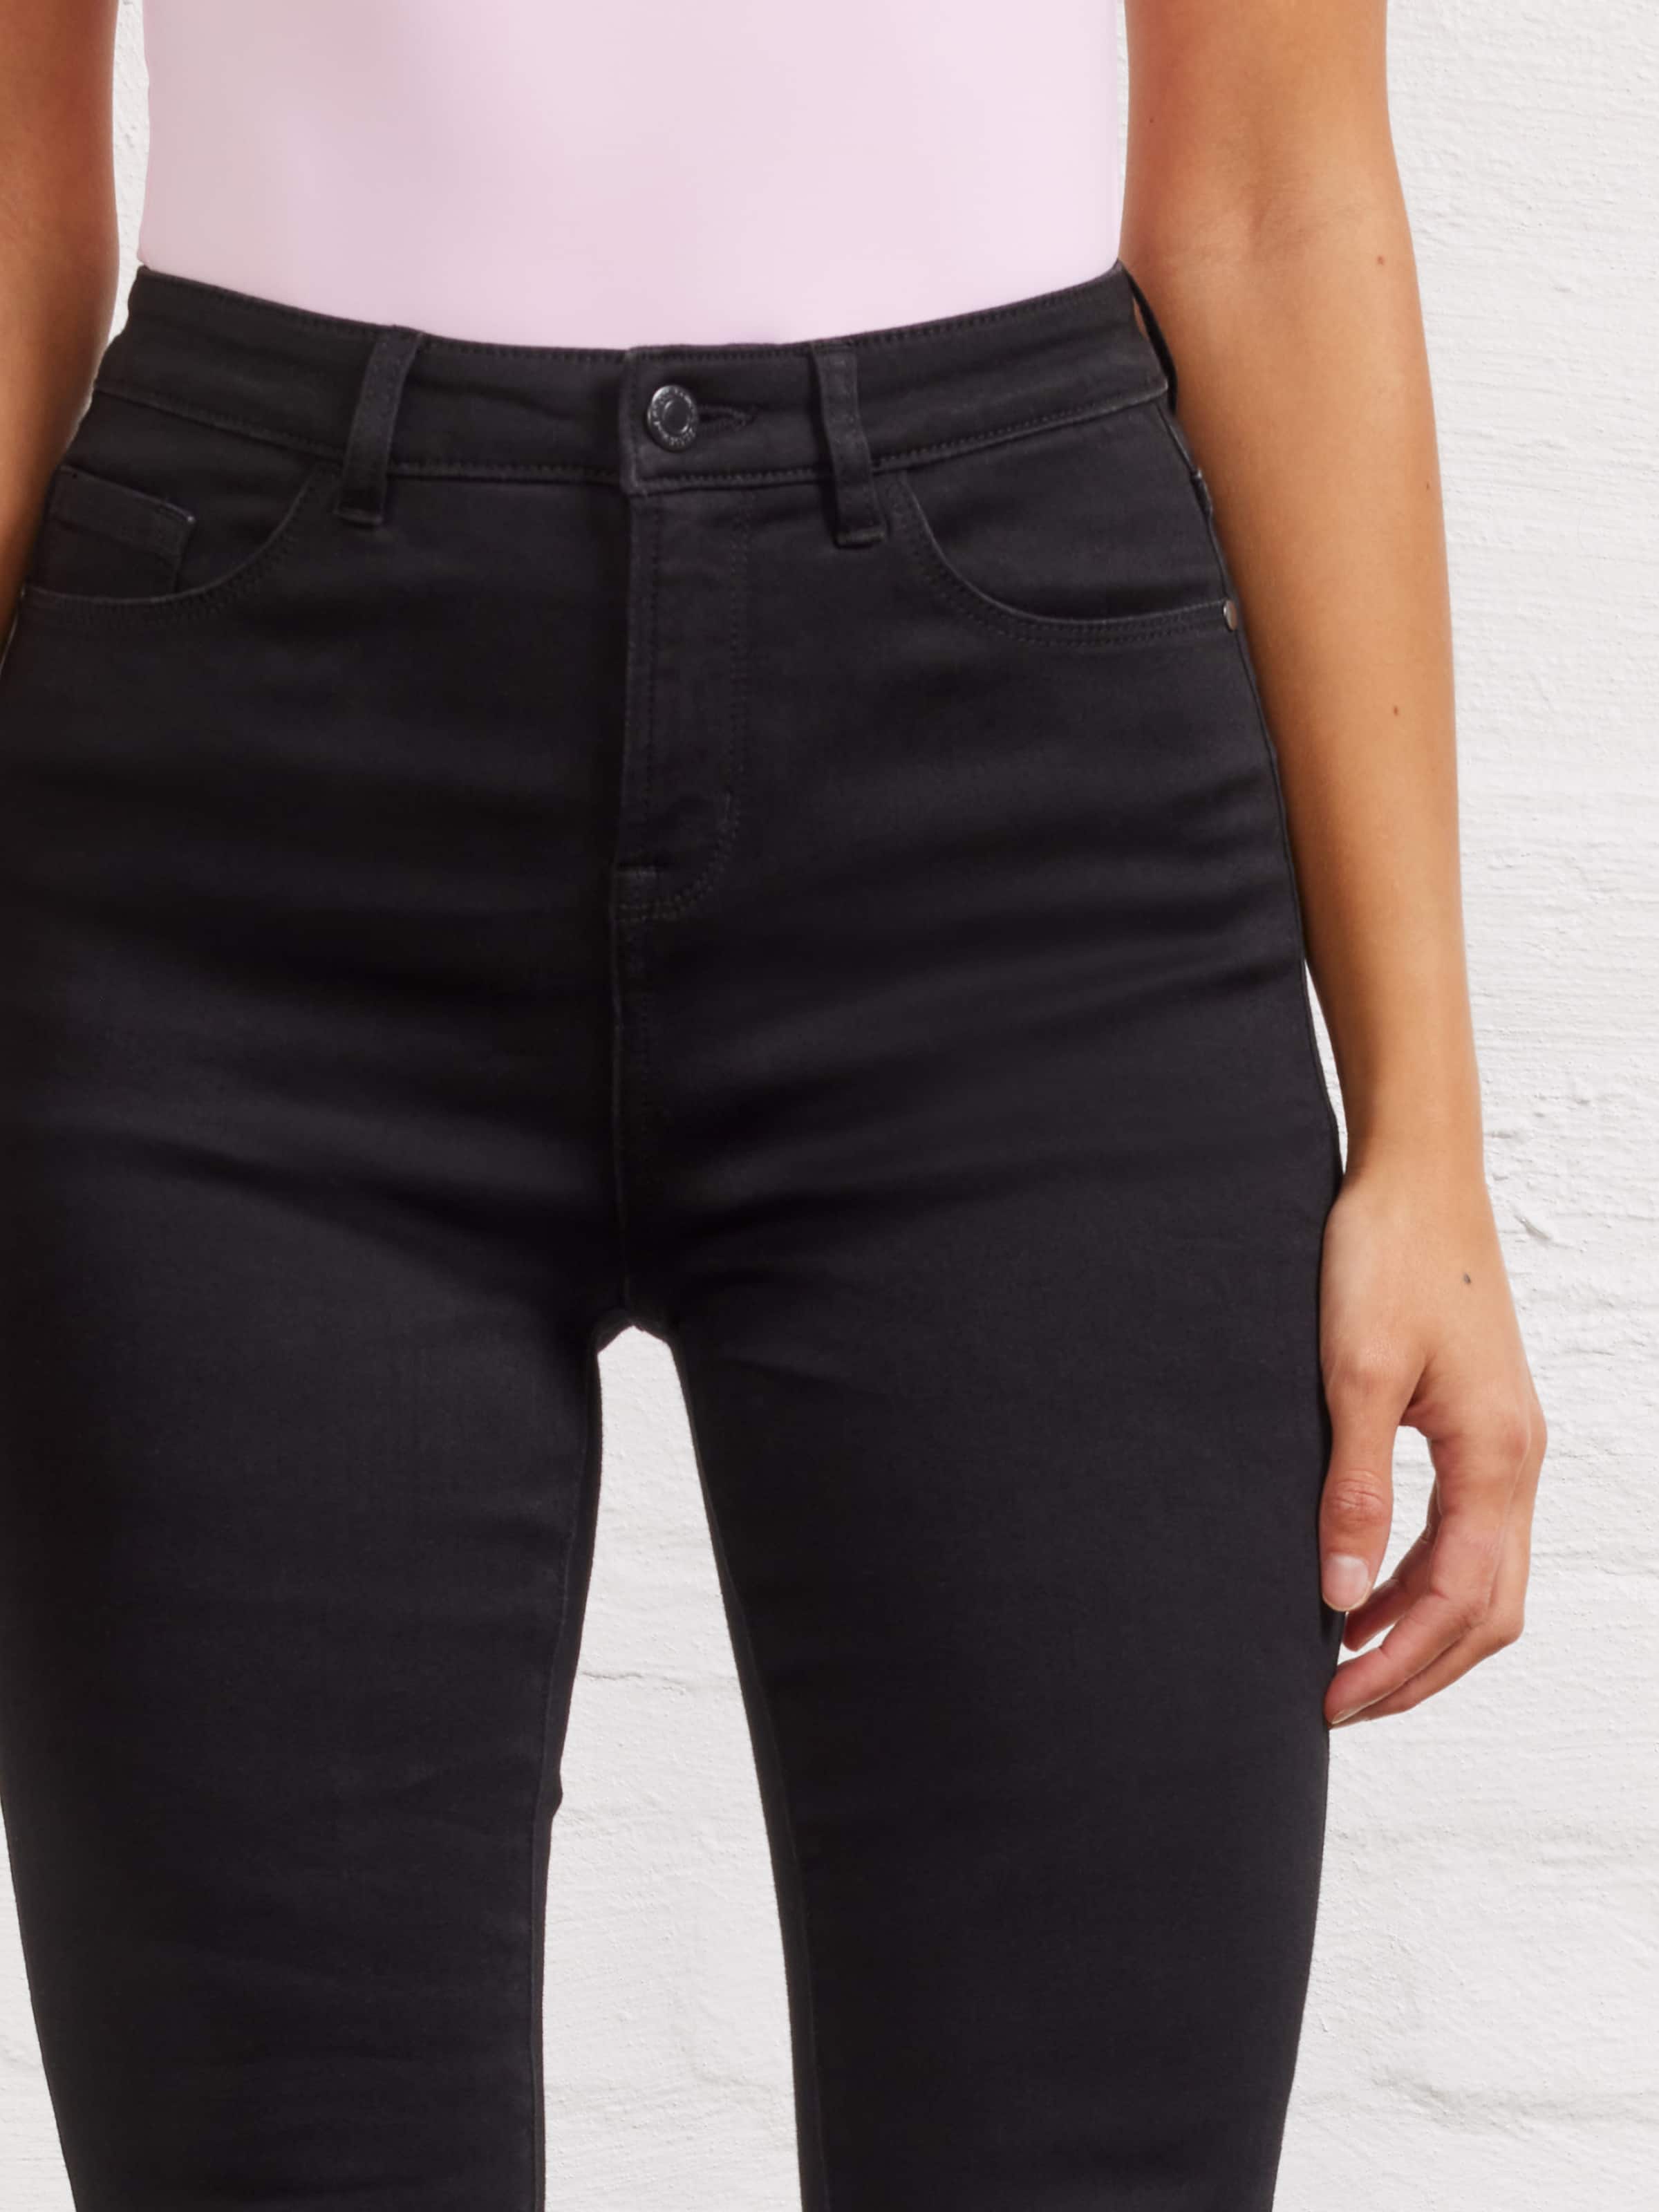 Jessie Black Ripped High Waisted Jeans - Matalan